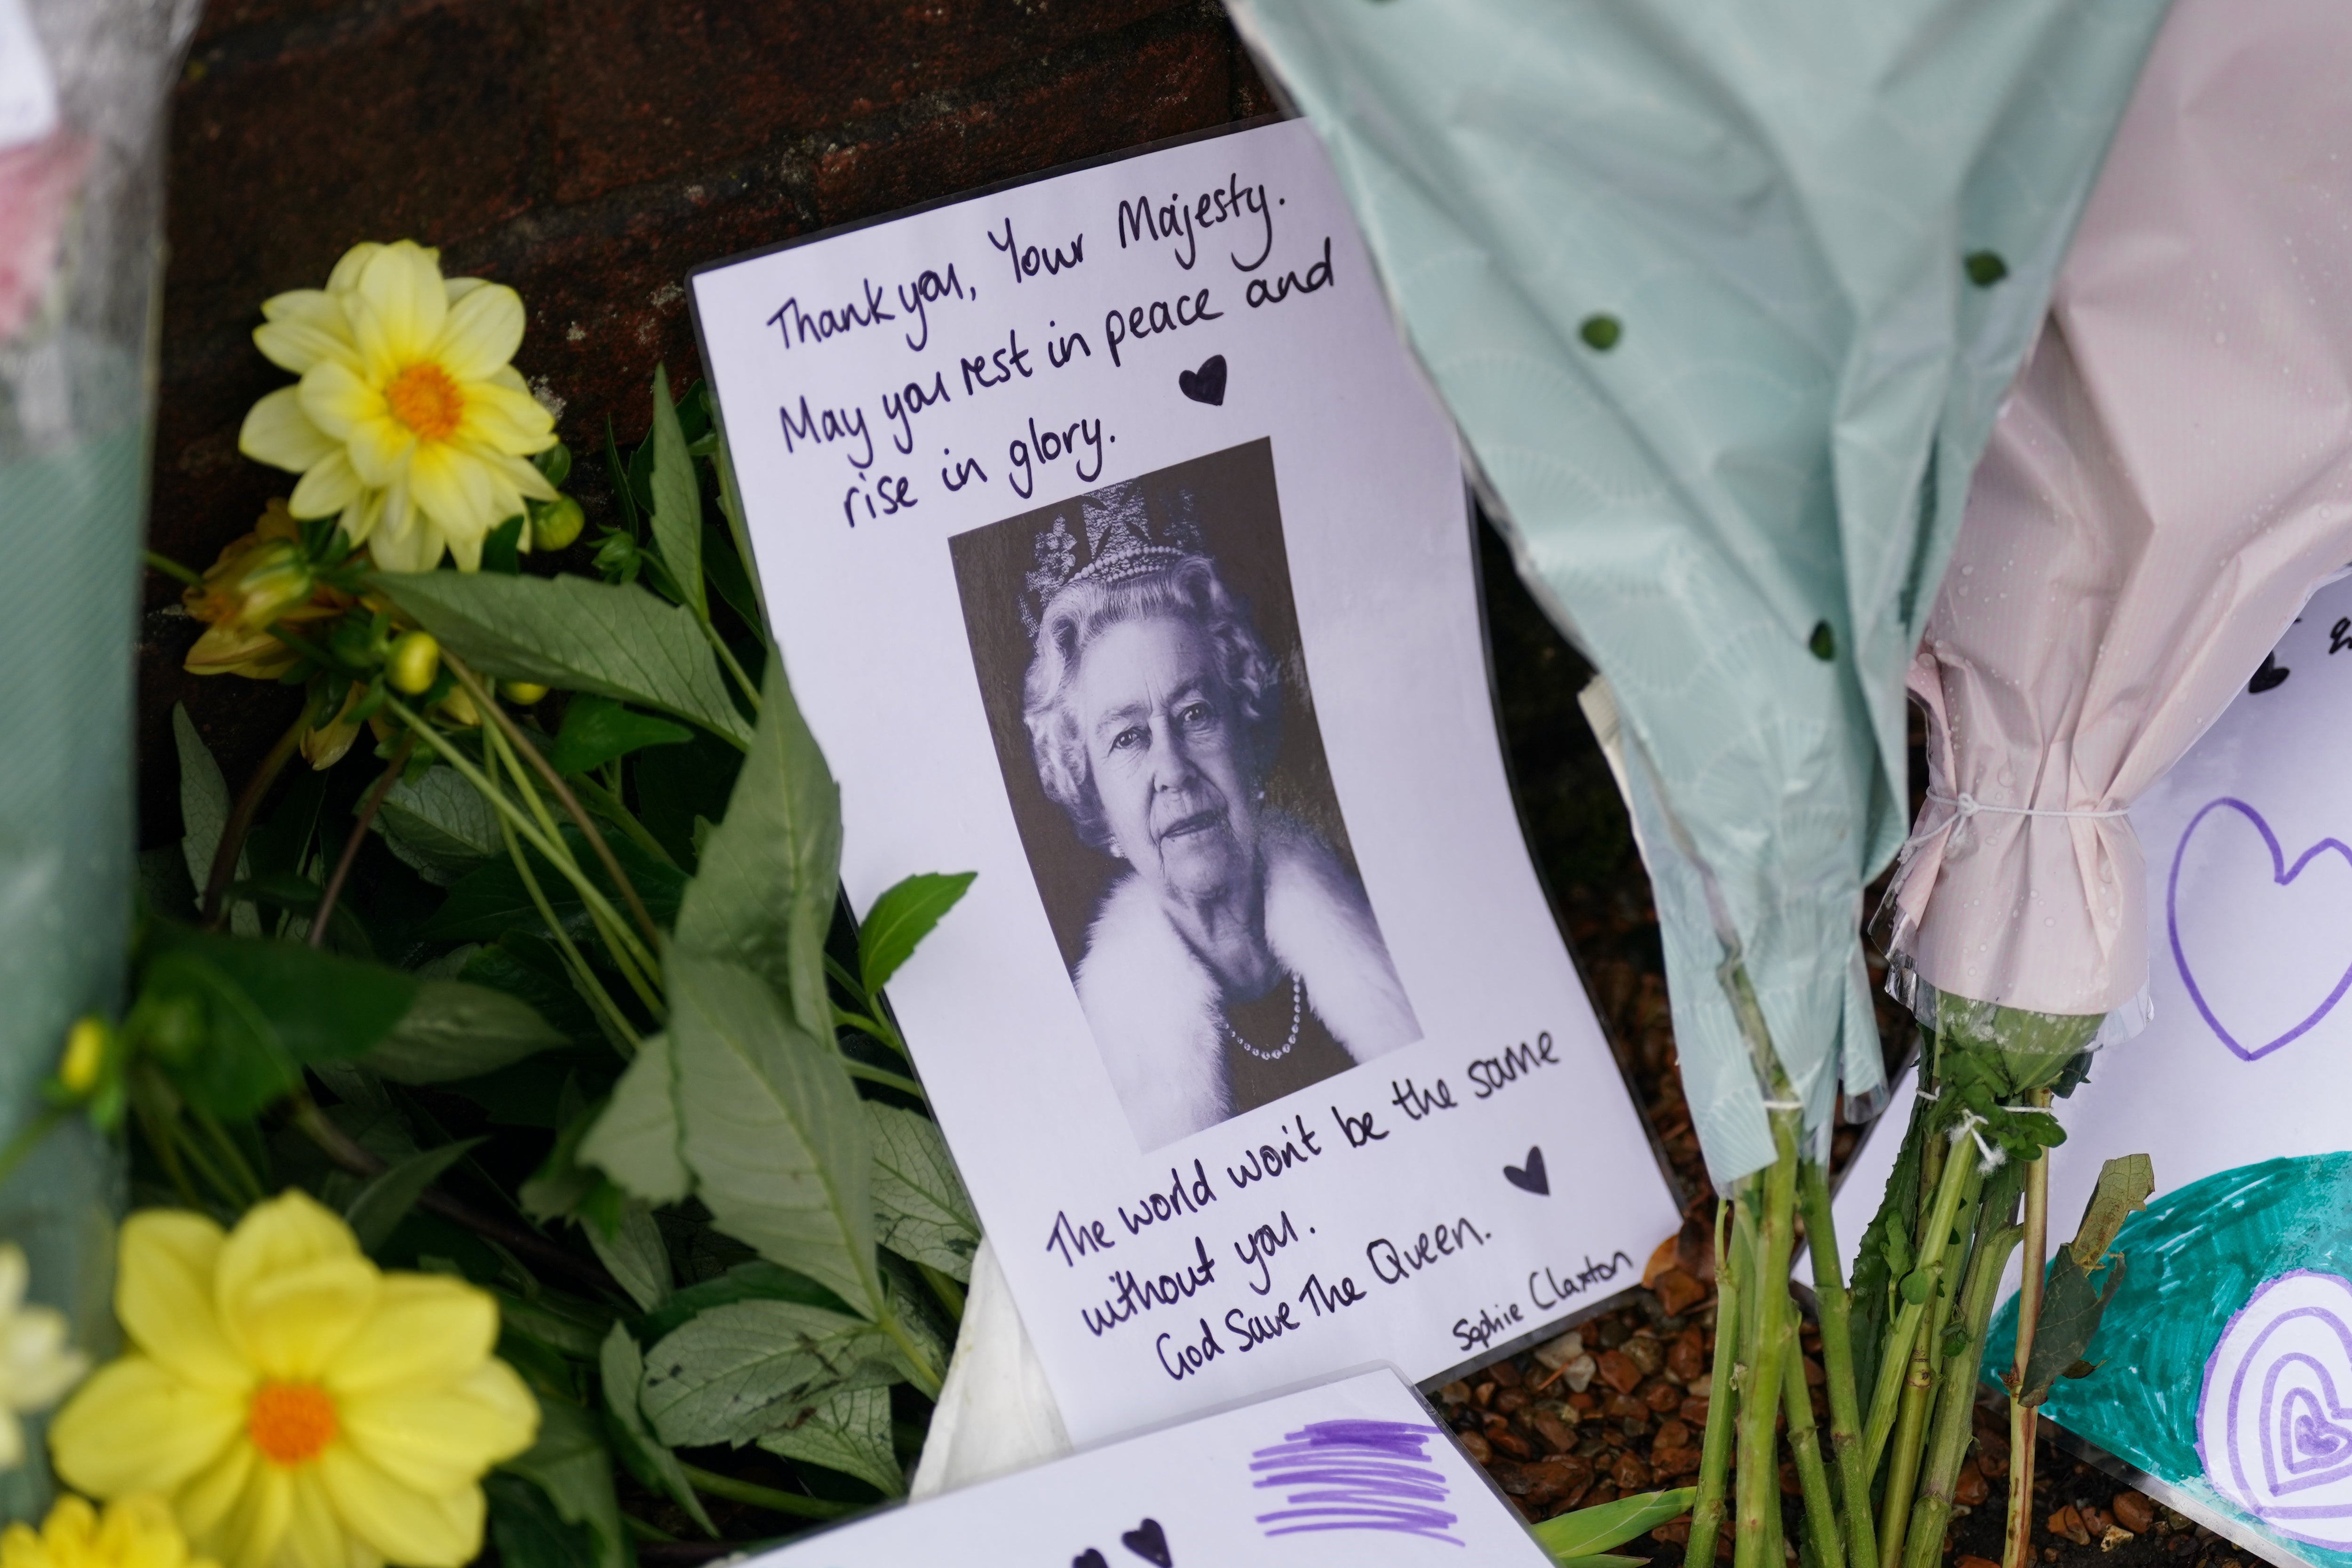 Floral tributes and messages at the Sandringham Estate in Norfolk following the death of Queen Elizabeth II (Joe Giddens/PA)